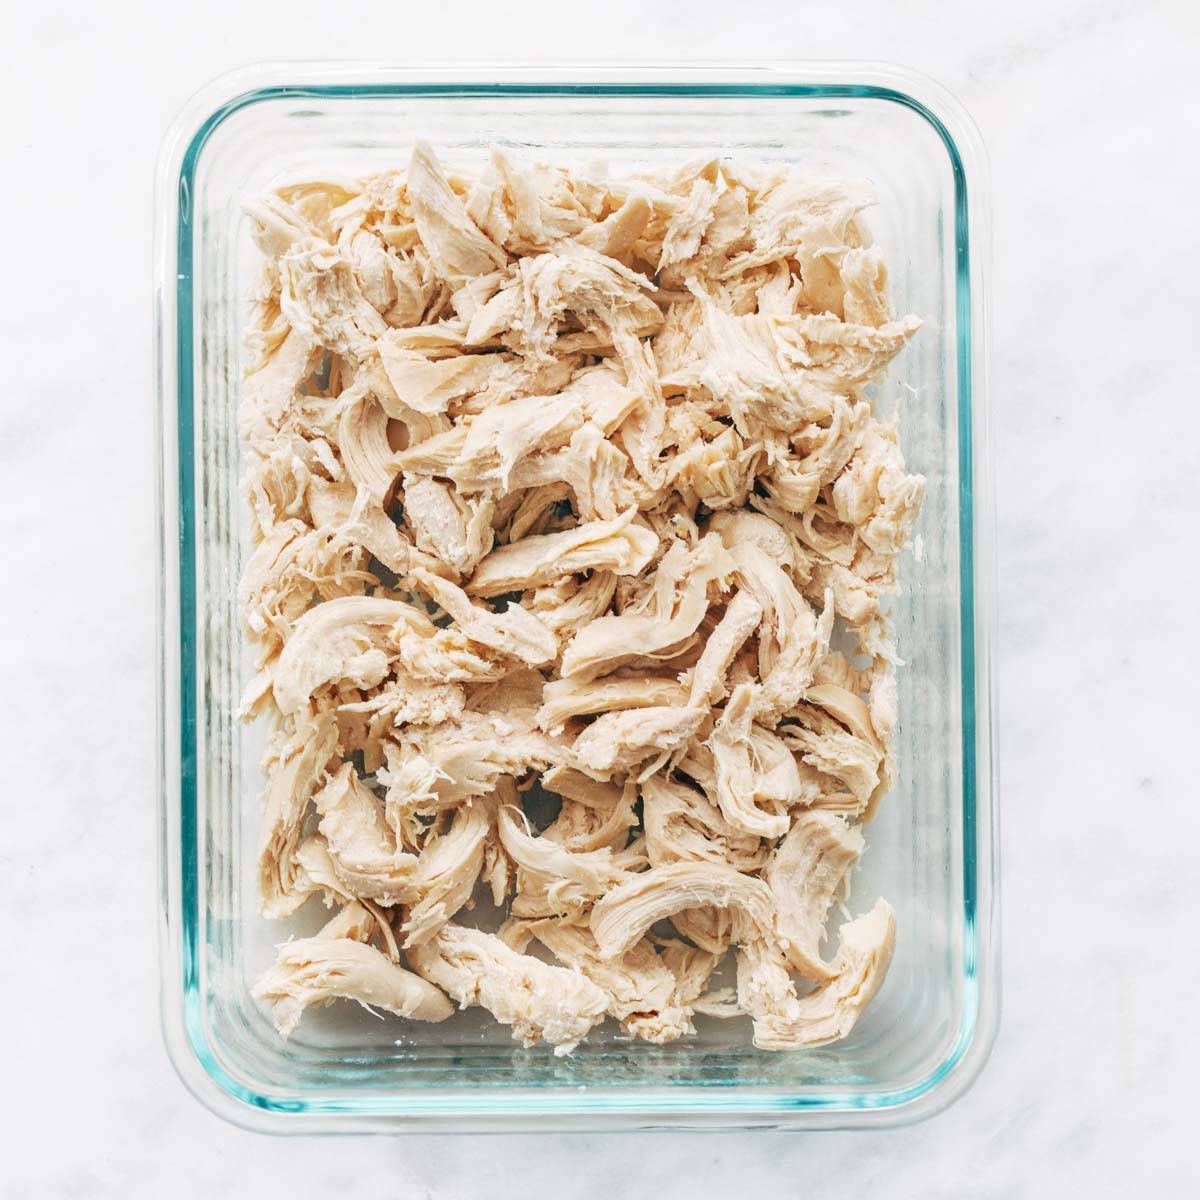 Shredded chicken in container.